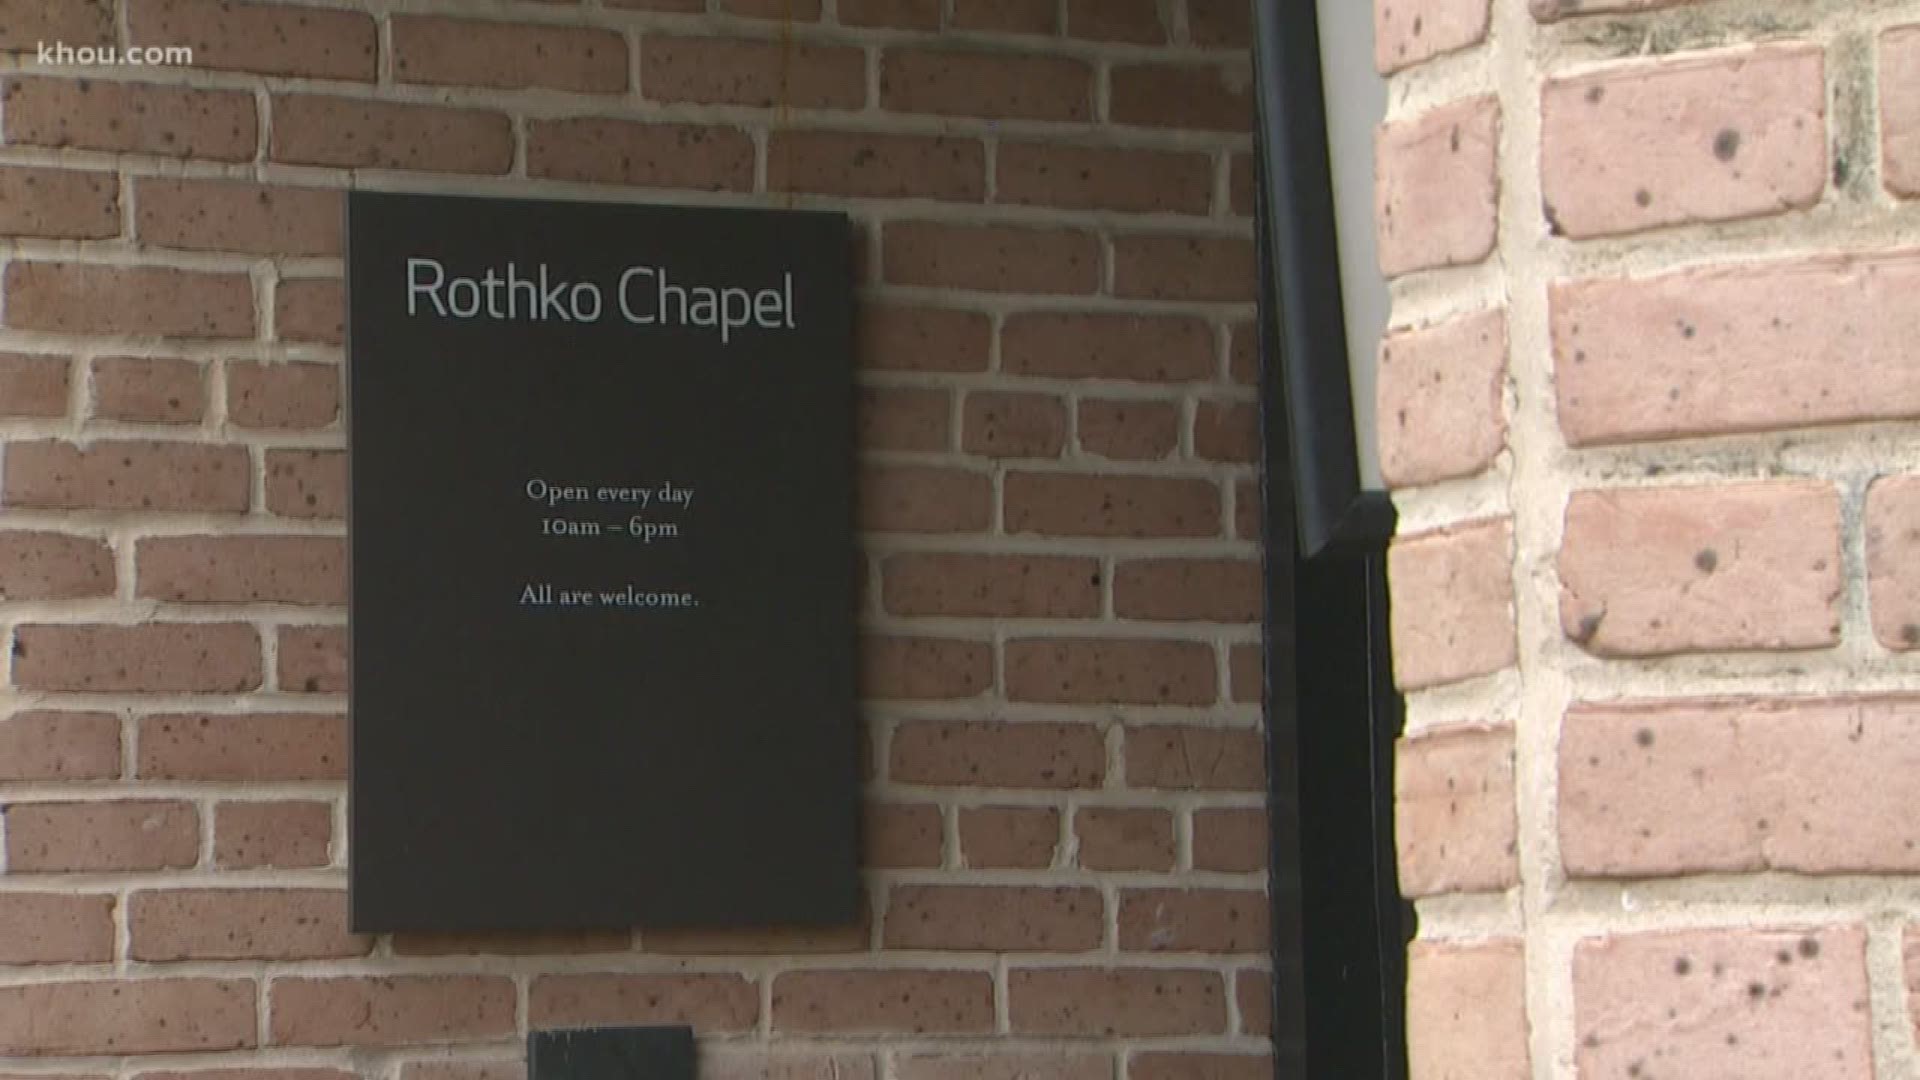 A Houston icon is officially closed for renovations. The last round of visitors saw the Rothko Chapel in its current state for the last time Saturday. Here's more on the chapel's past and future.